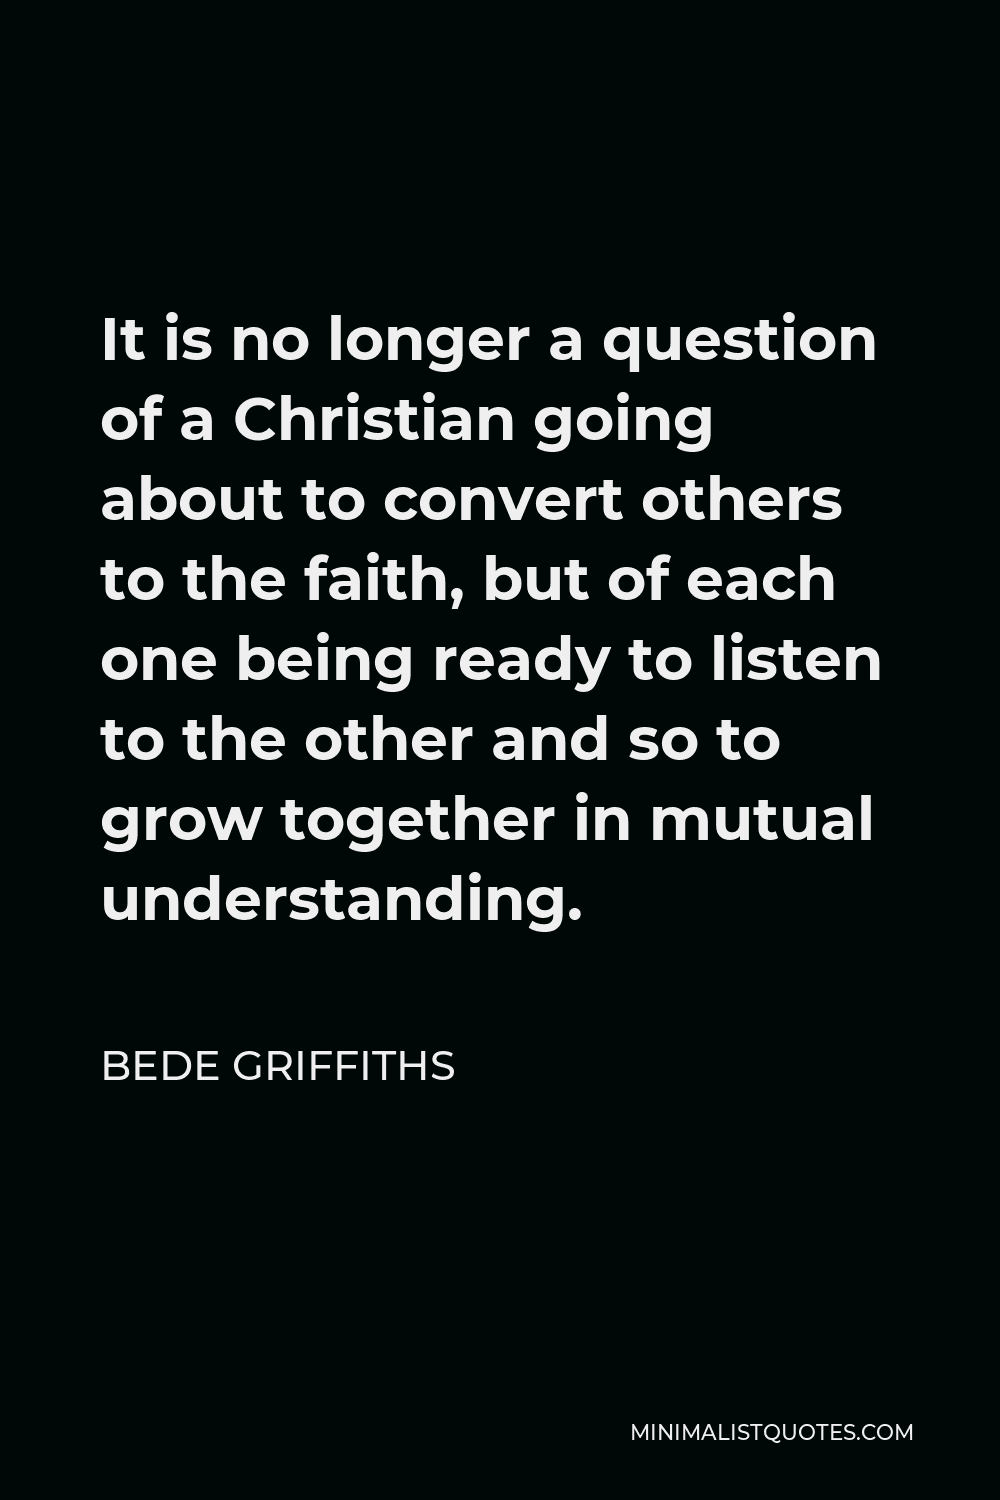 Bede Griffiths Quote - It is no longer a question of a Christian going about to convert others to the faith, but of each one being ready to listen to the other and so to grow together in mutual understanding.